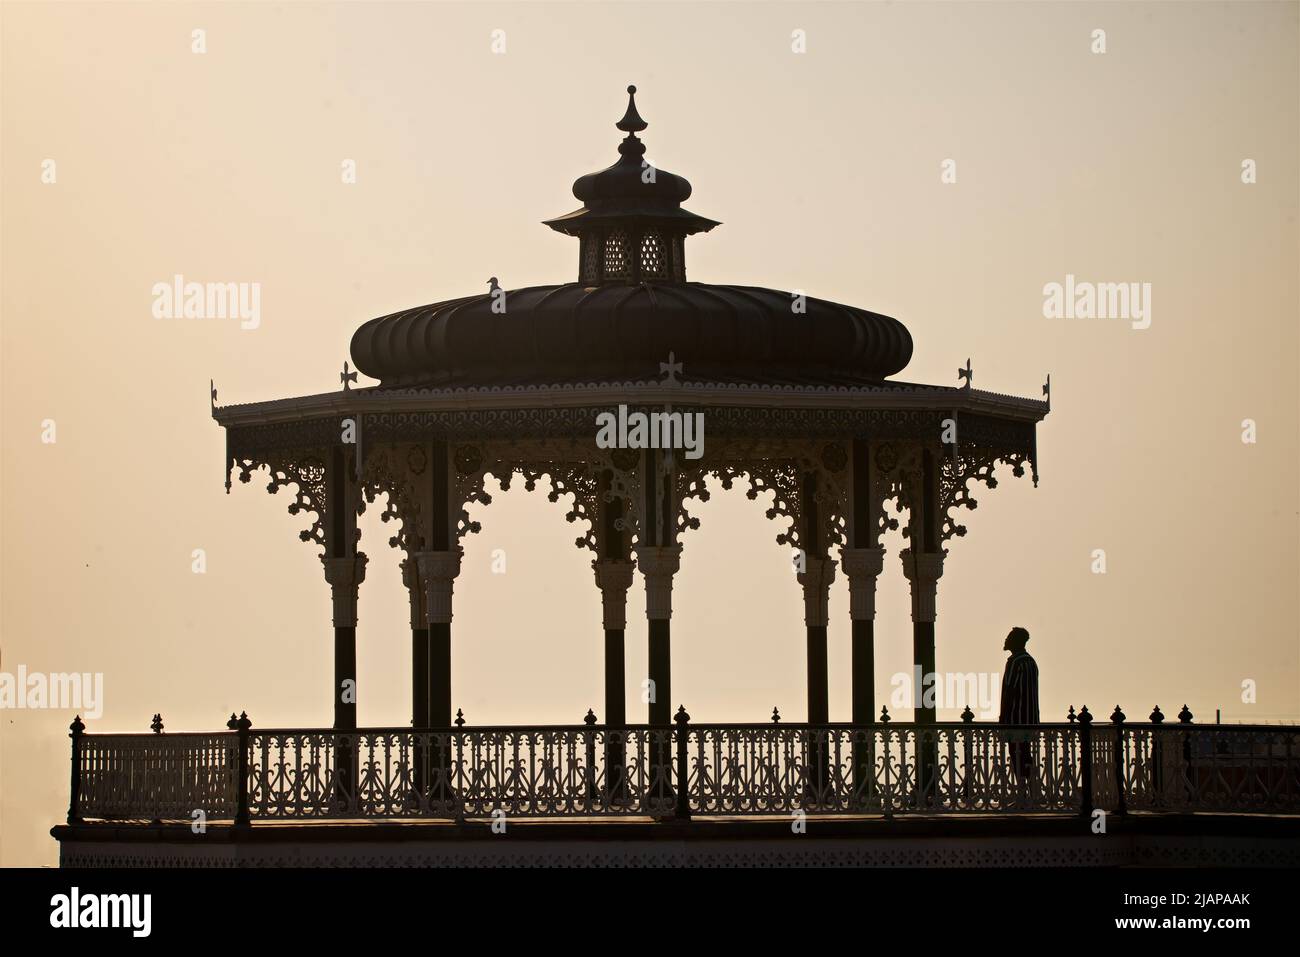 Brighton's Victorian Bandstand. Brighton & Hove, East Sussex, England. Dusky pink sky at dusk. Stock Photo